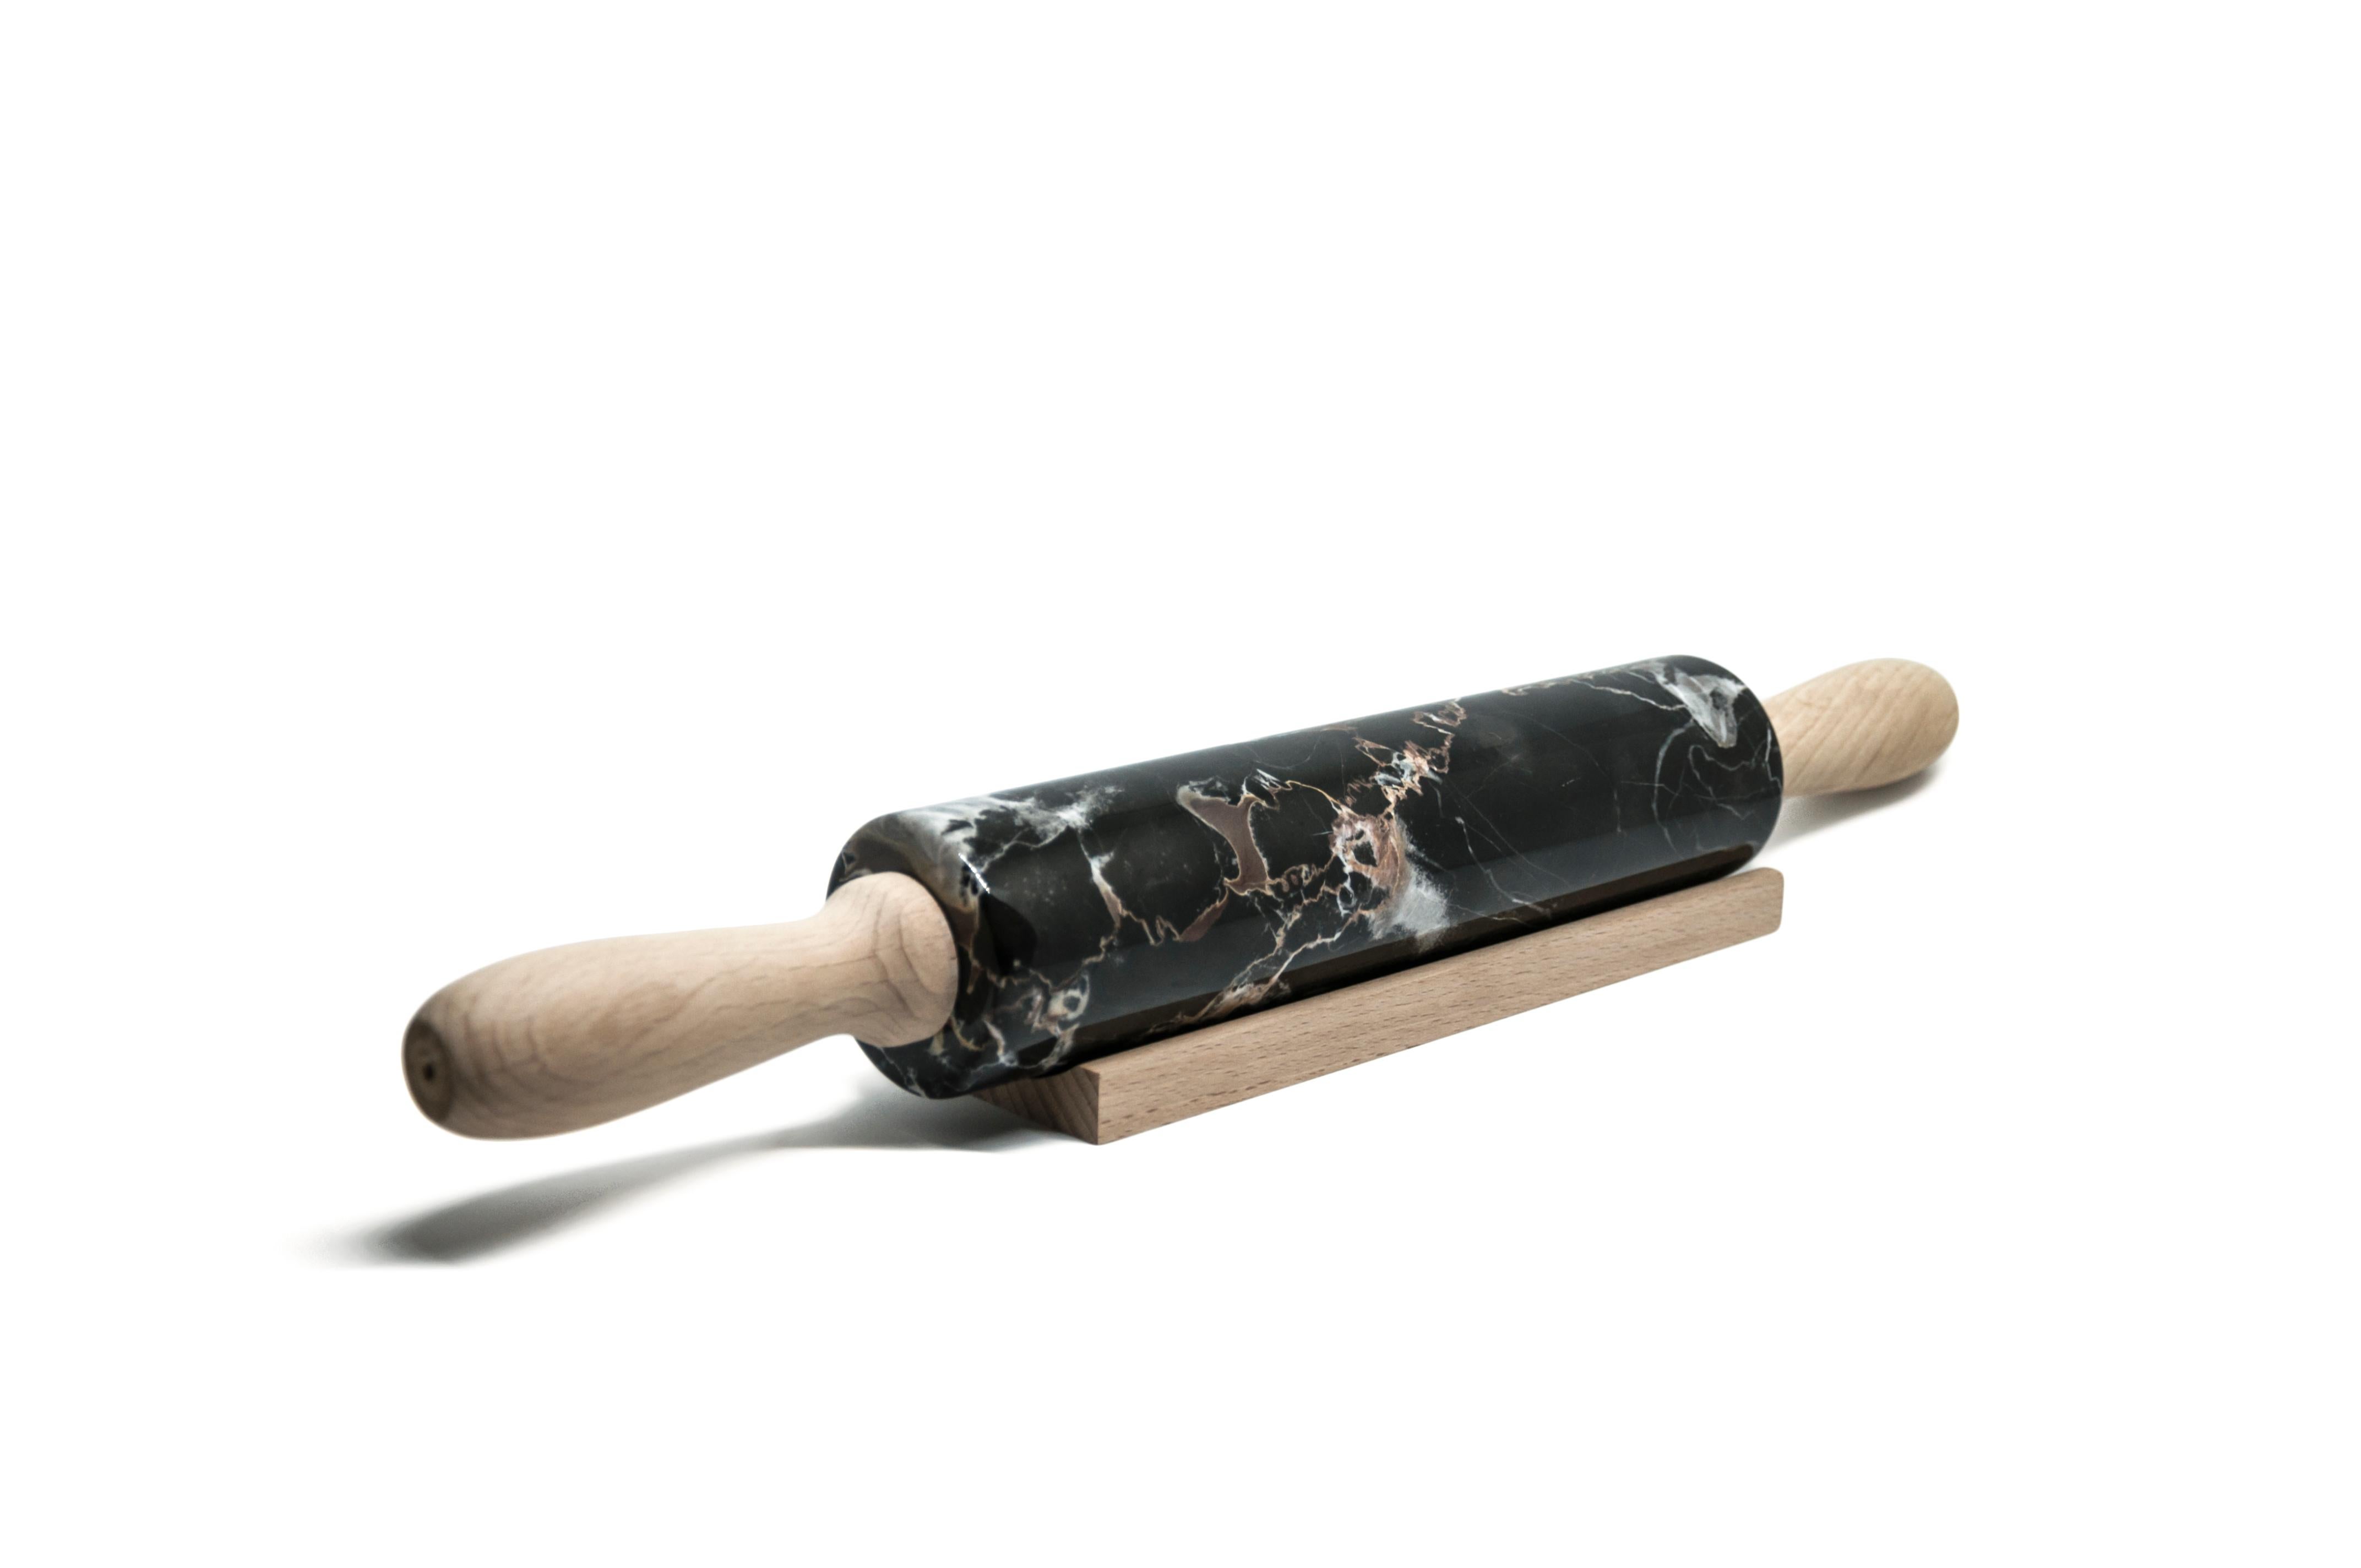 Portoro marble rolling pin with wooden handles. It is assembled manually. Each piece is in a way unique (every marble block is different in veins and shades) and handmade by Italian artisans specialized over generations in processing marble. Slight